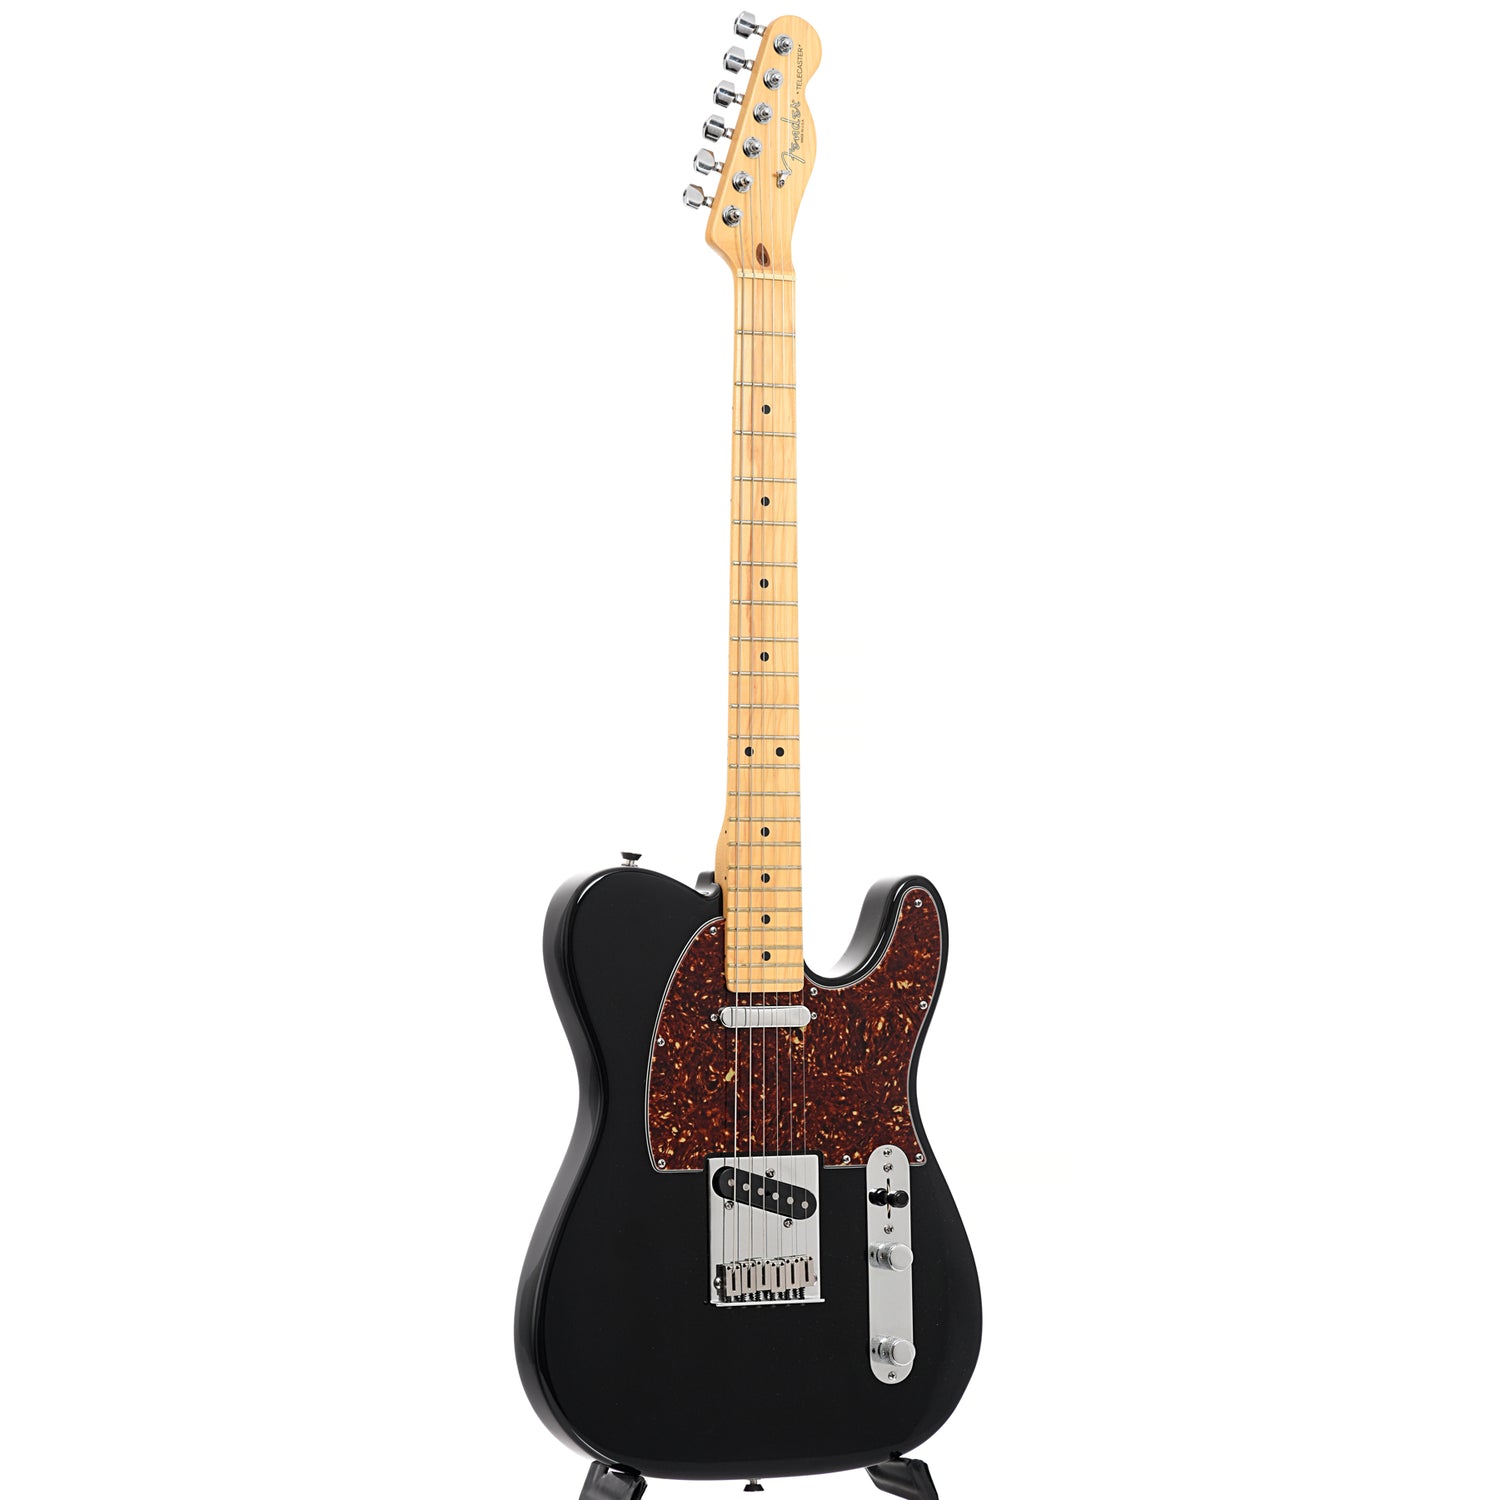 Full front and side of Fender American Series Telecaster 